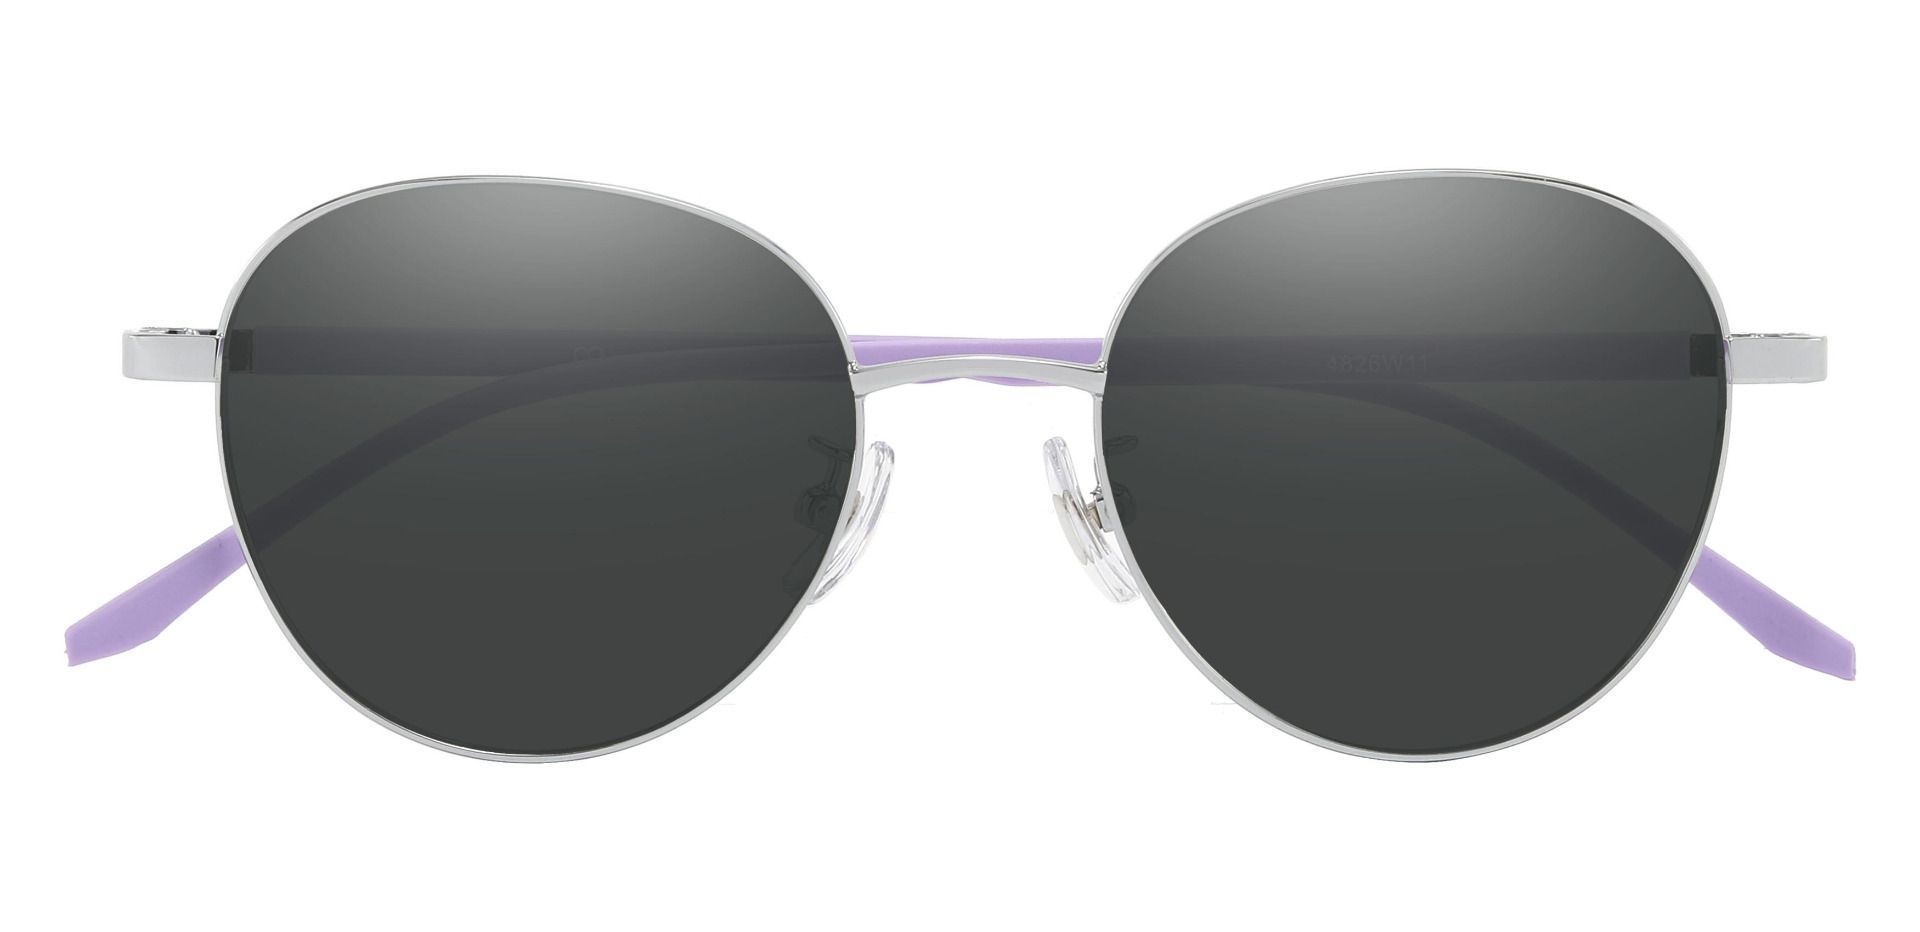 Meredith Oval Prescription Sunglasses - Silver Frame With Gray Lenses